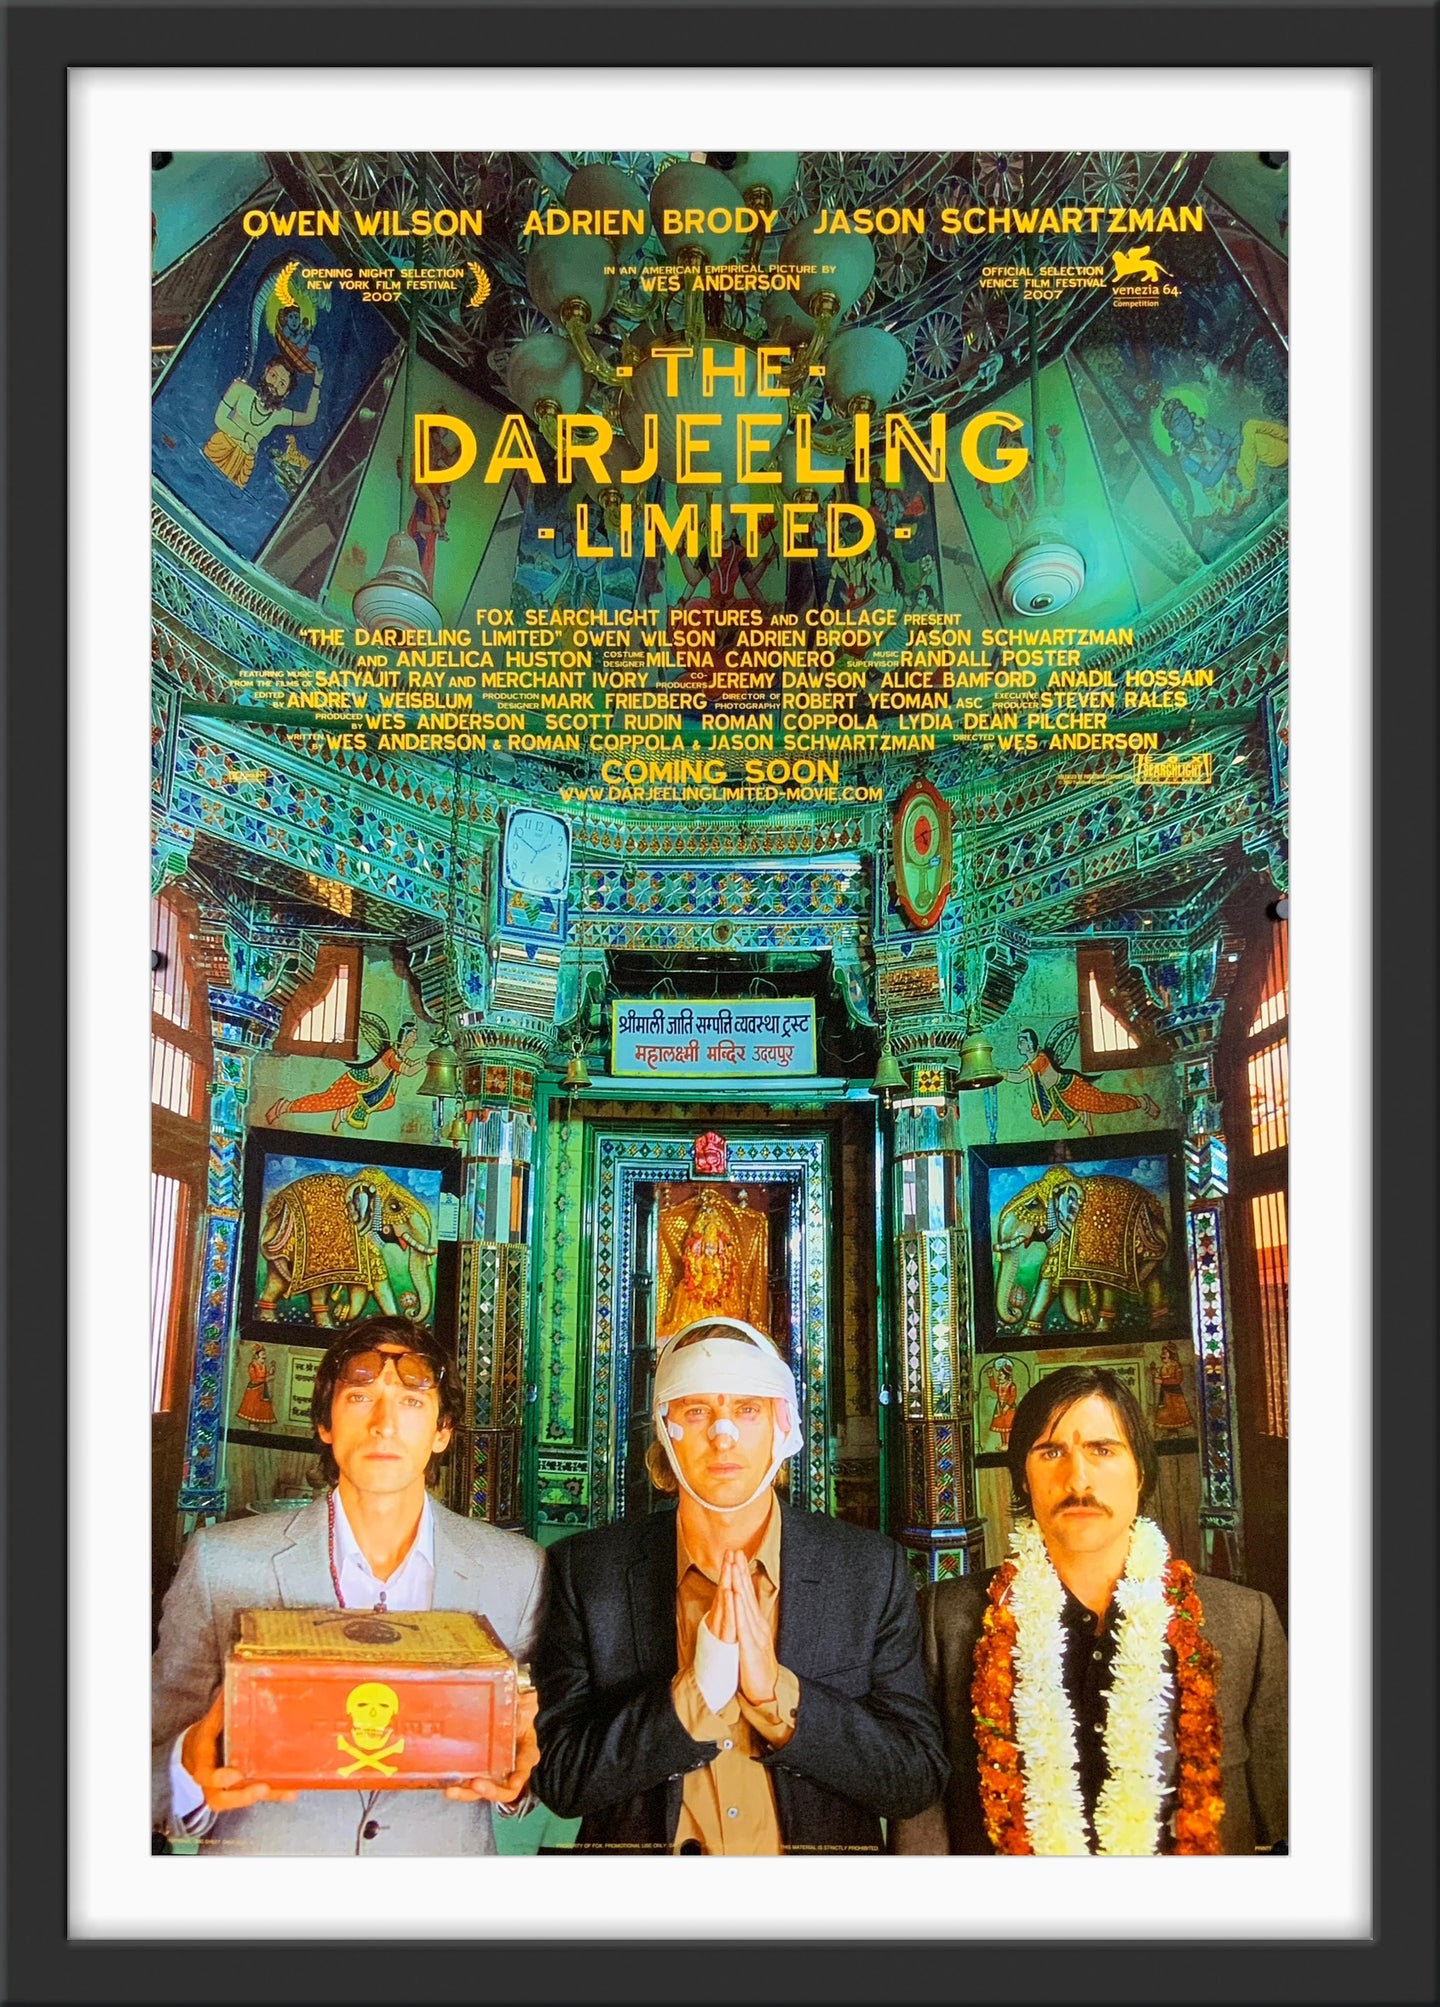 An original movie poster for the Wes Anderson film The Darjeeling Limited